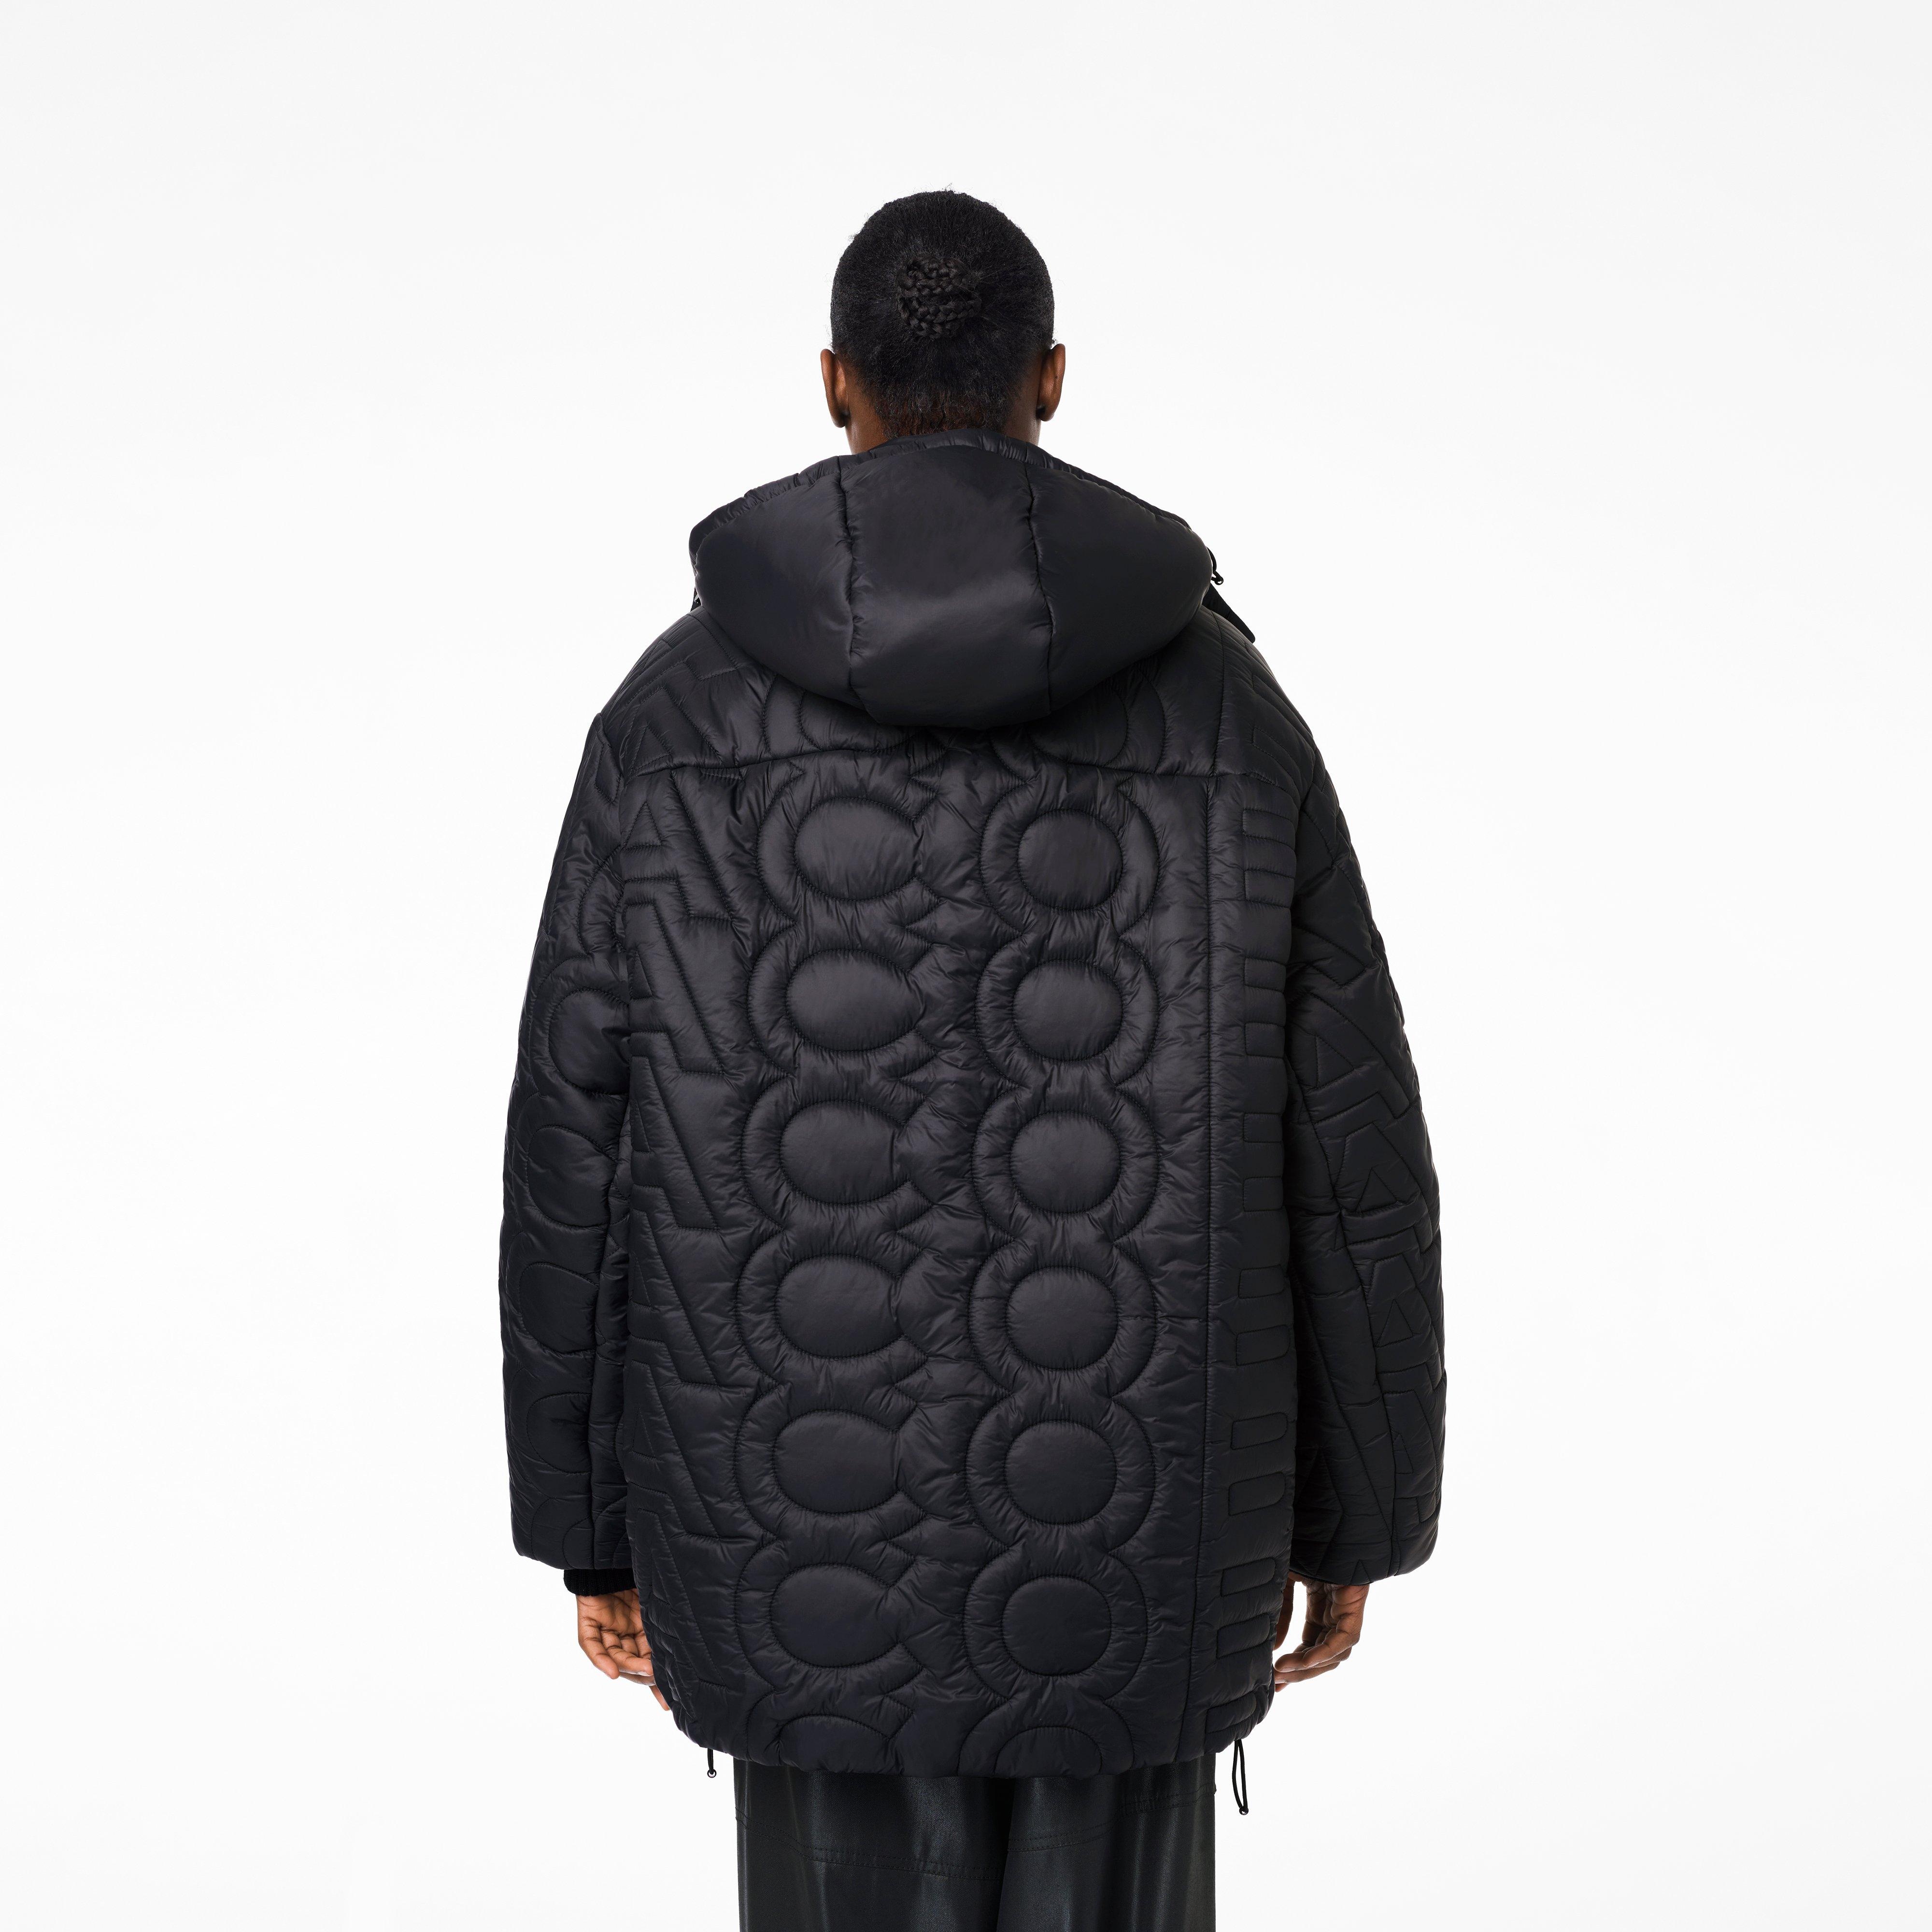 THE MONOGRAM QUILTED PUFFER JACKET - 8